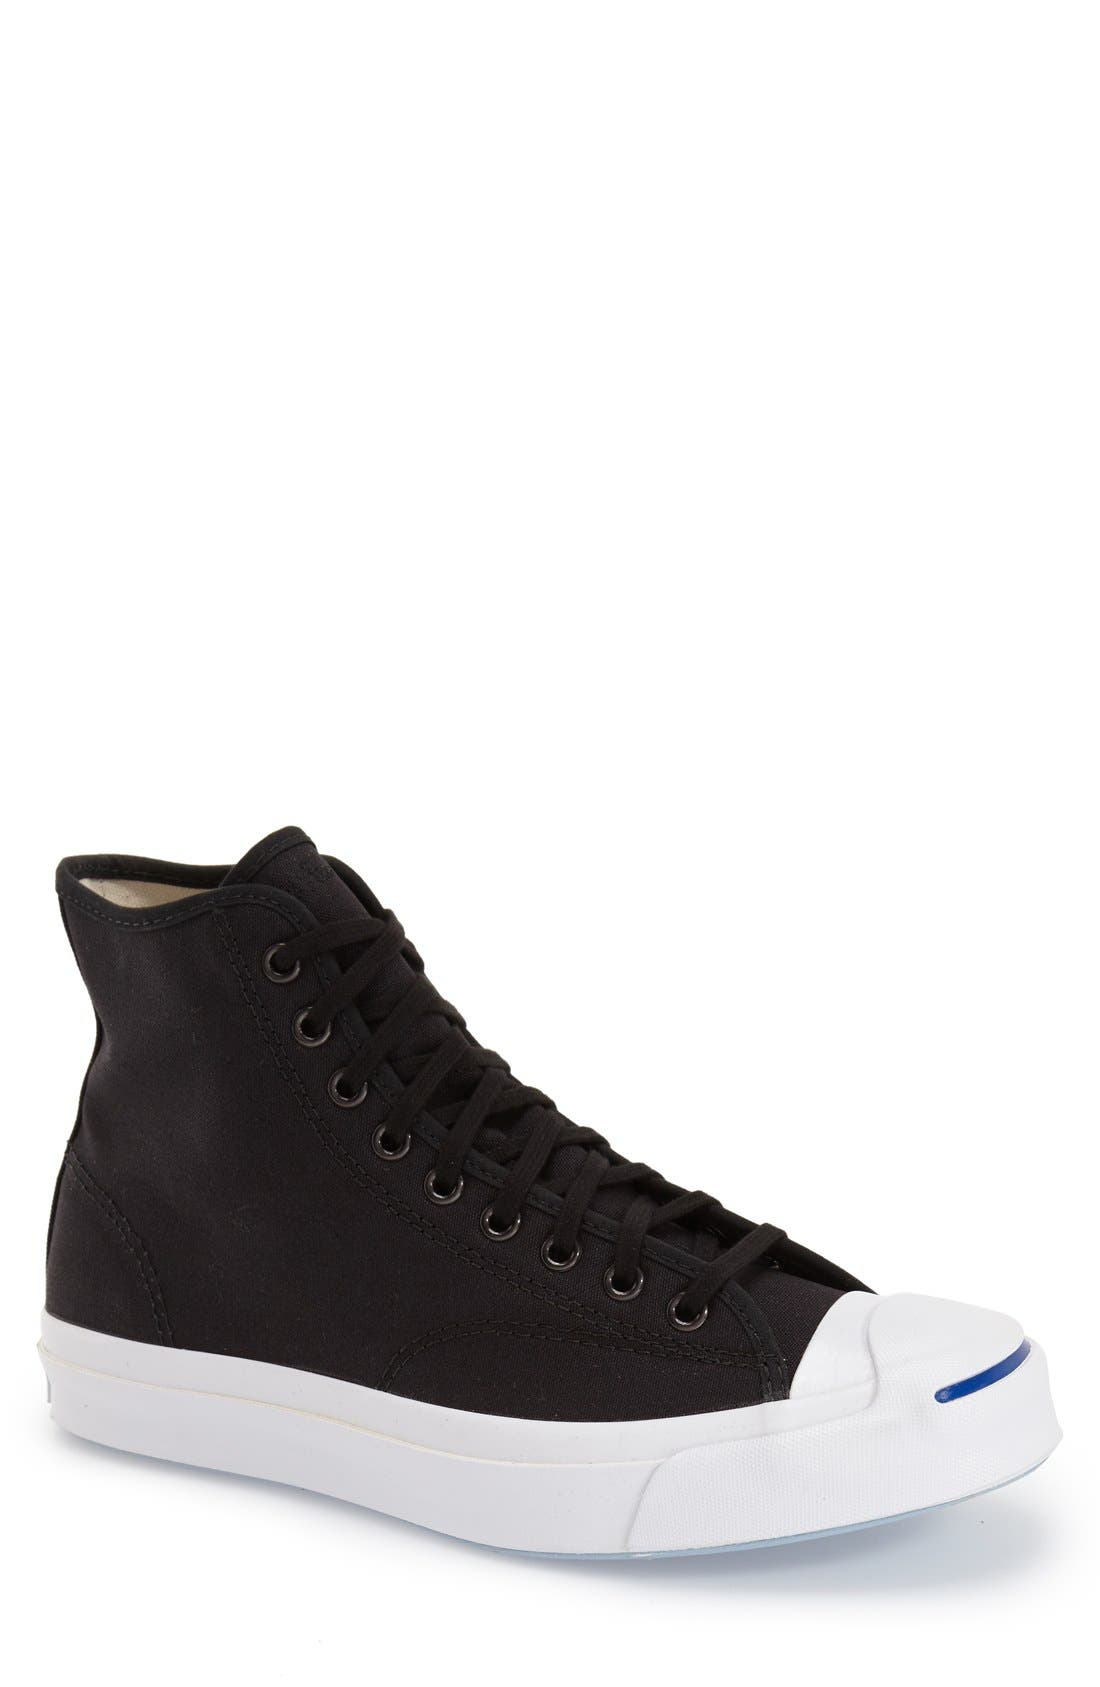 Converse 'Jack Purcell' High Top 